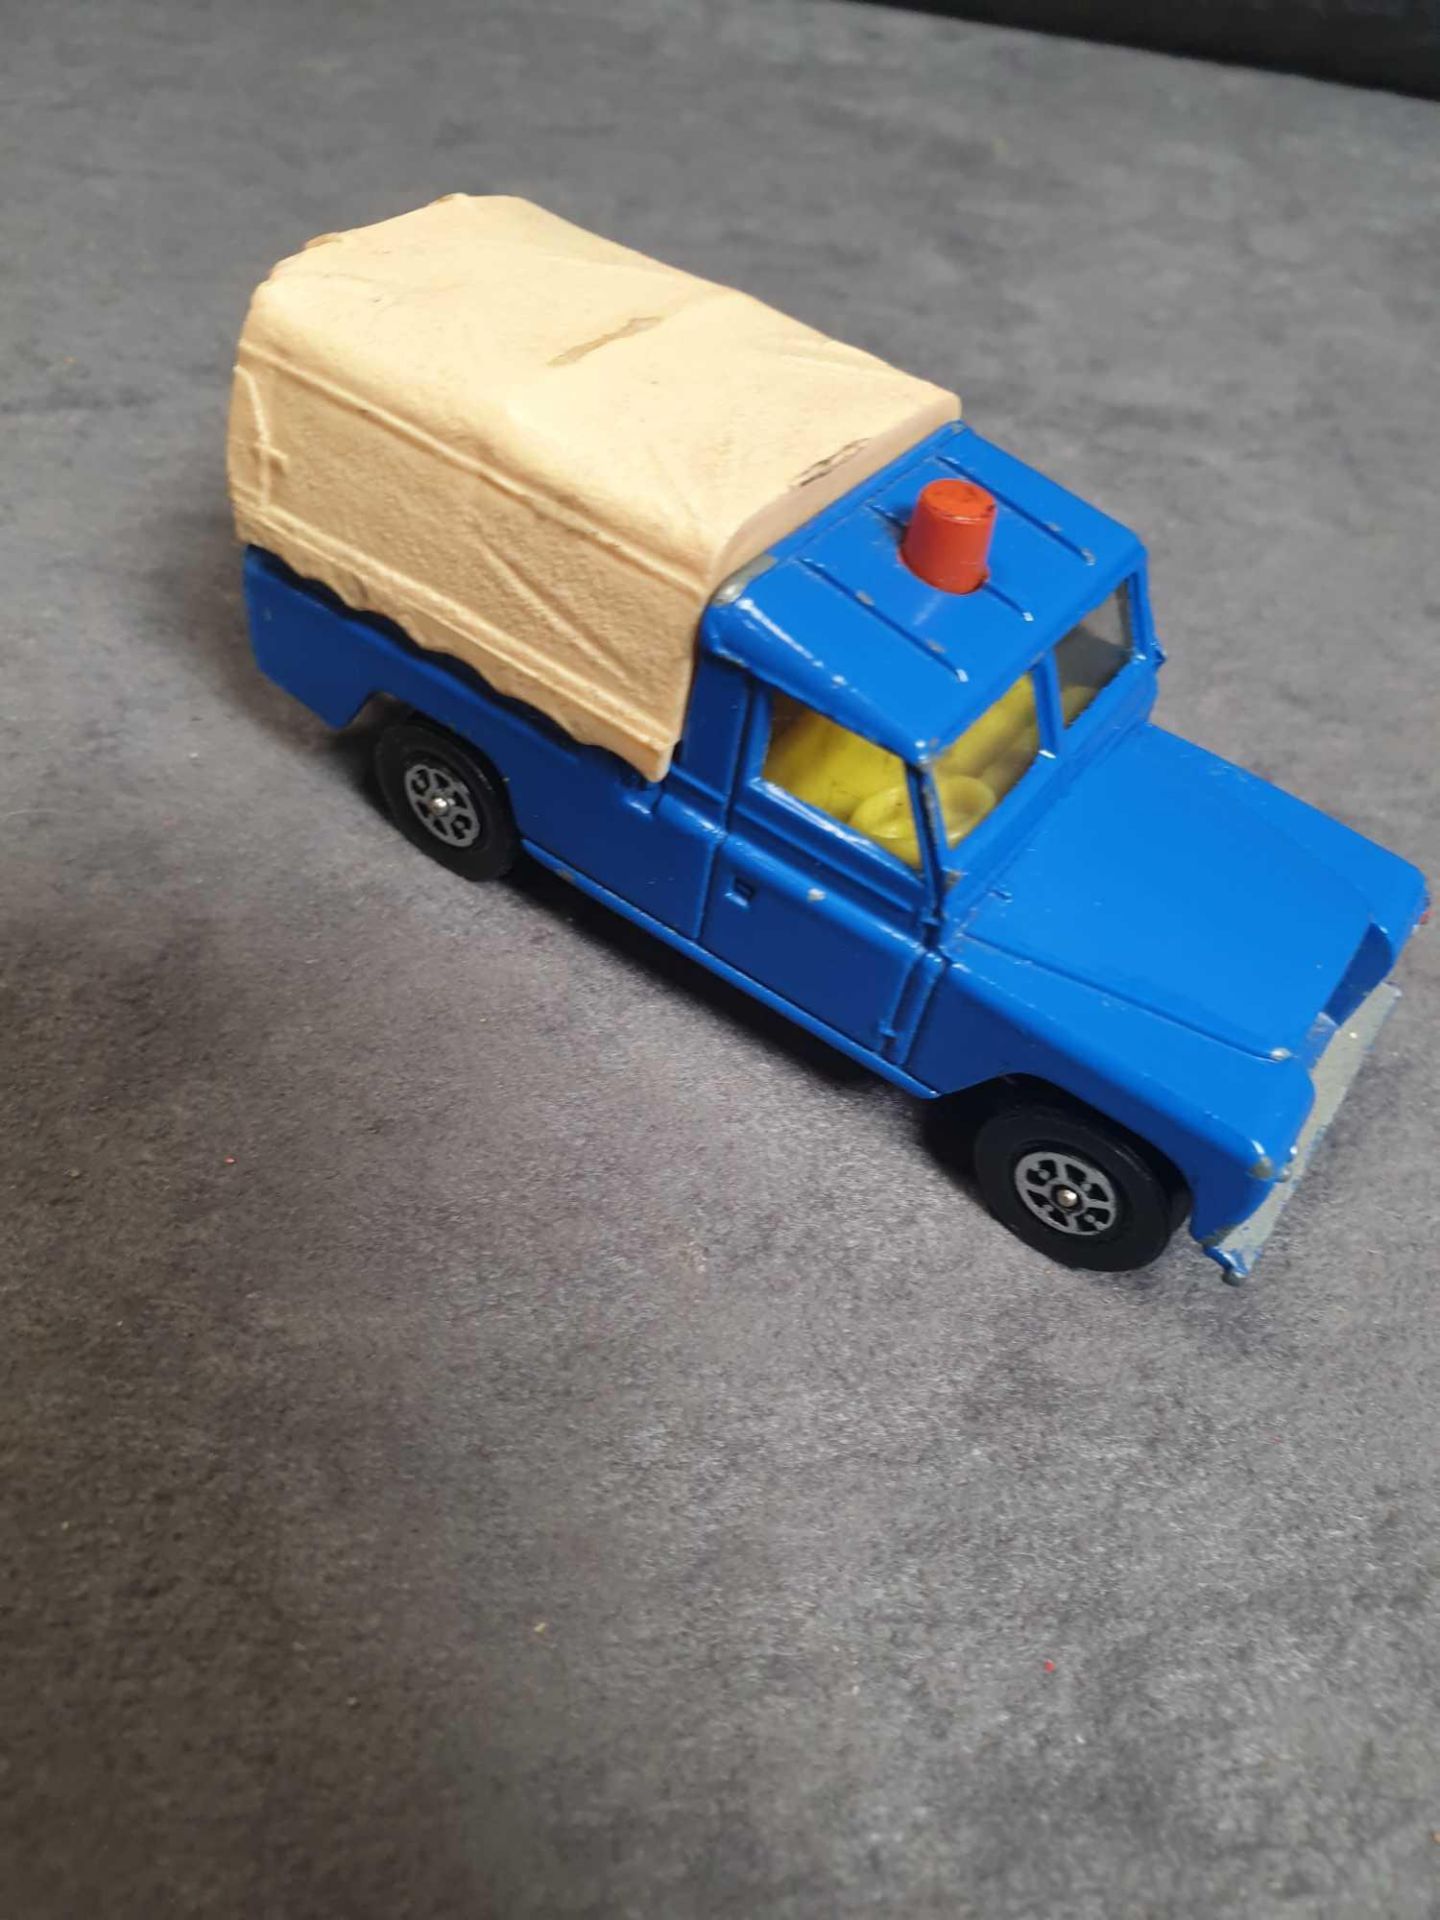 Corgi Diecast Unboxed Landrover 109 WB Blue Metallic Cream Hood And Red Lamp Very Good Model - Image 2 of 3